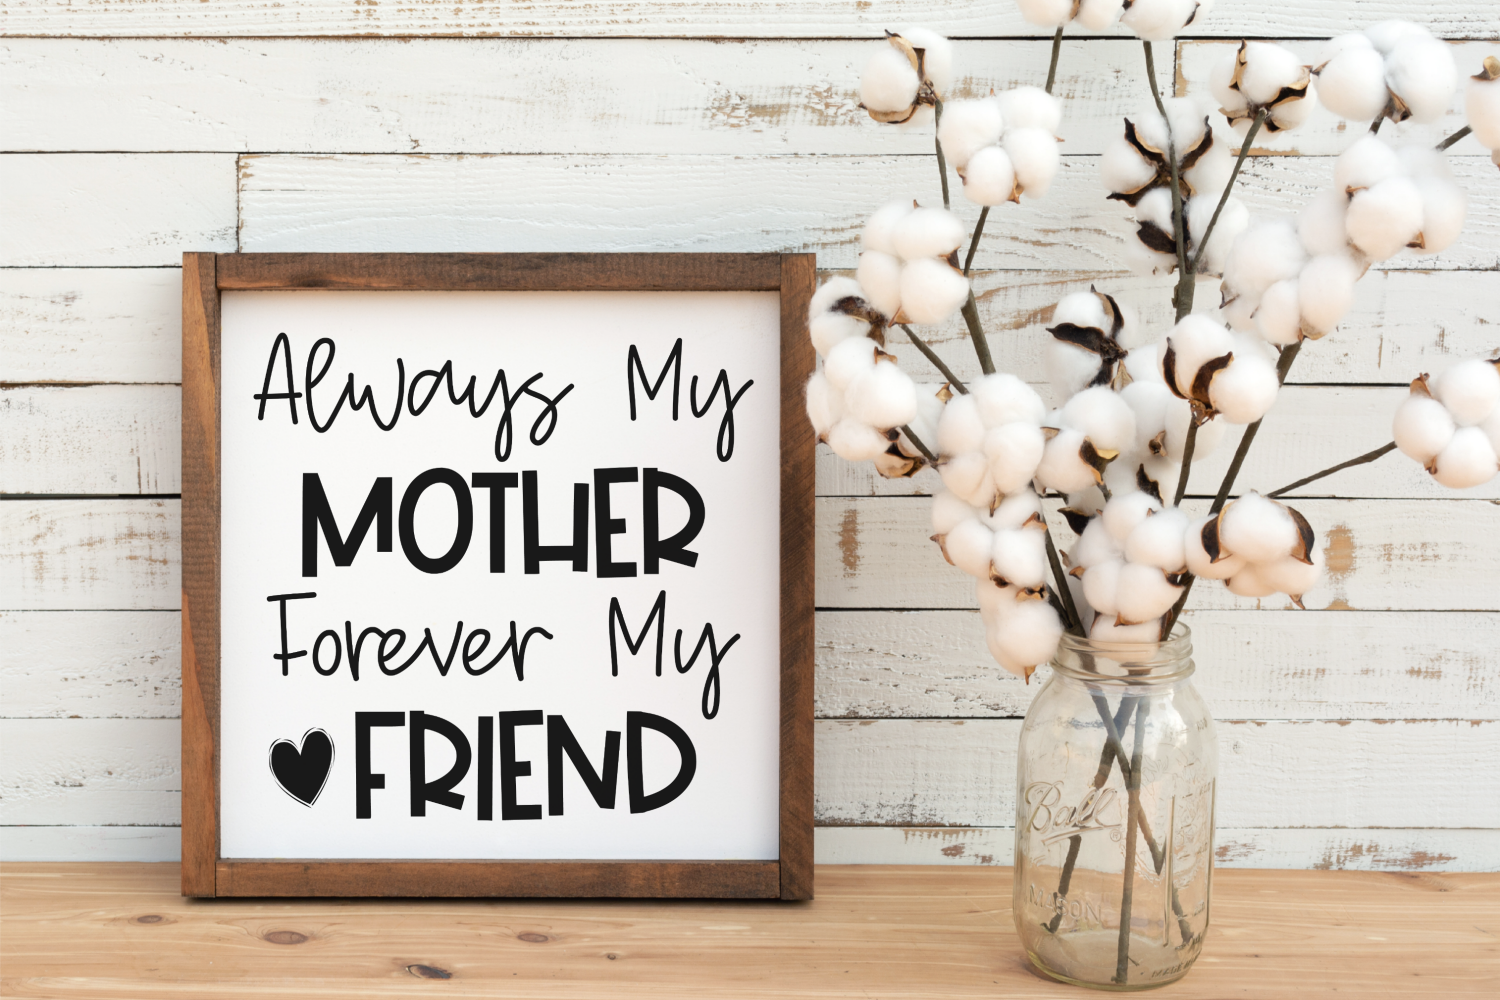 My daughter forever. My friend's mother. Always my mother always my friends.